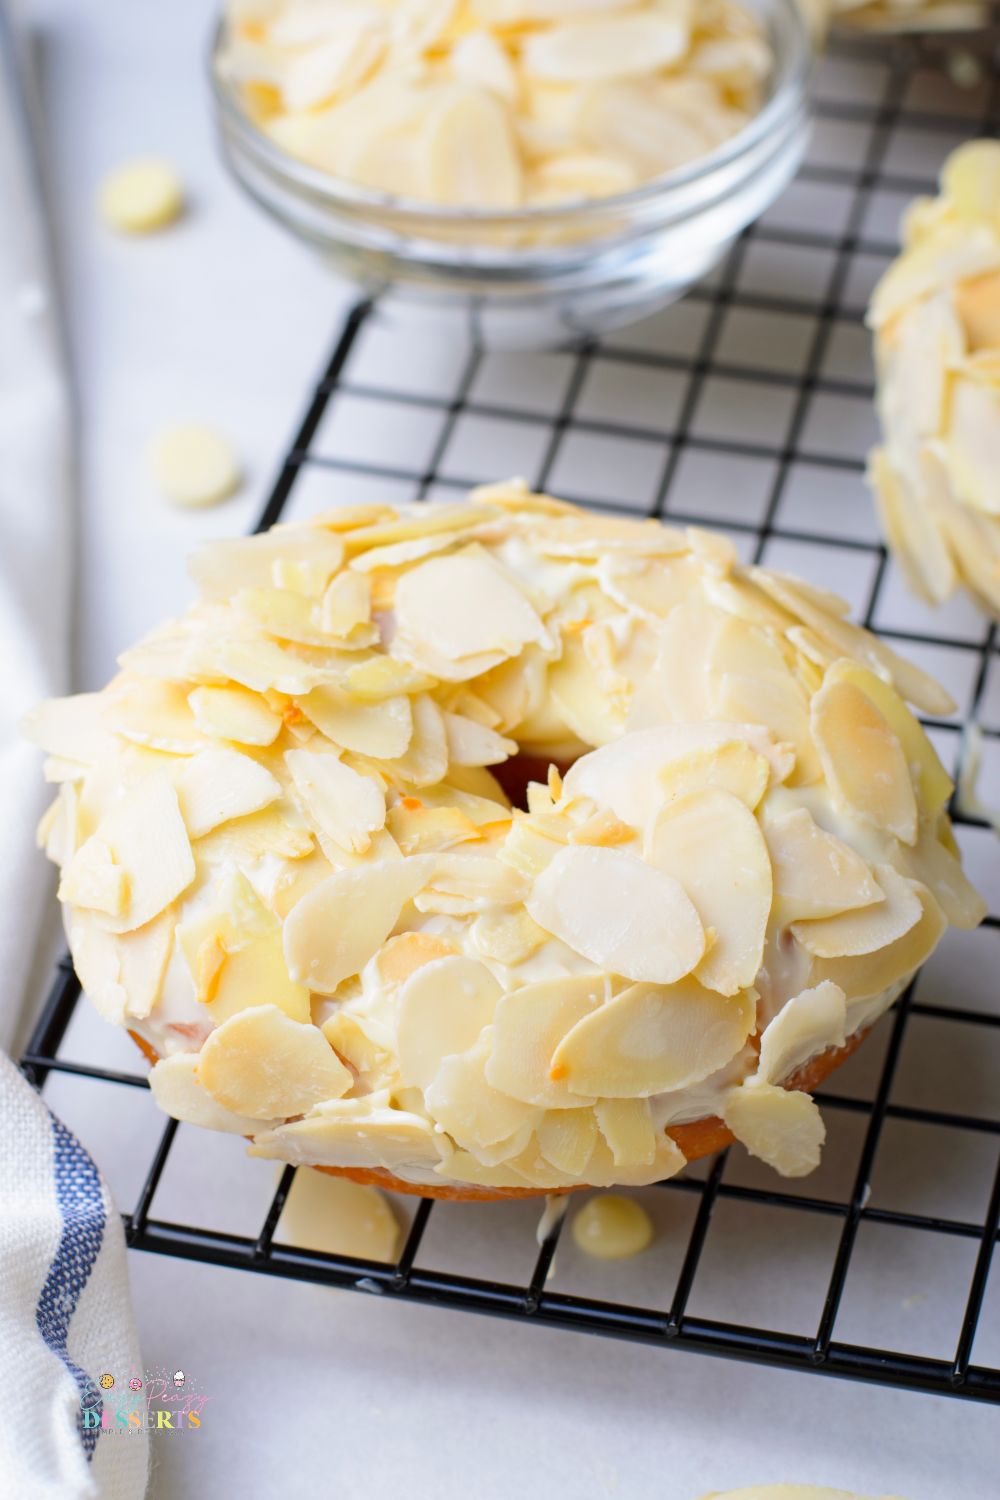 Close up image of yeast donut covered in white chocolate glaze and shaved almonds